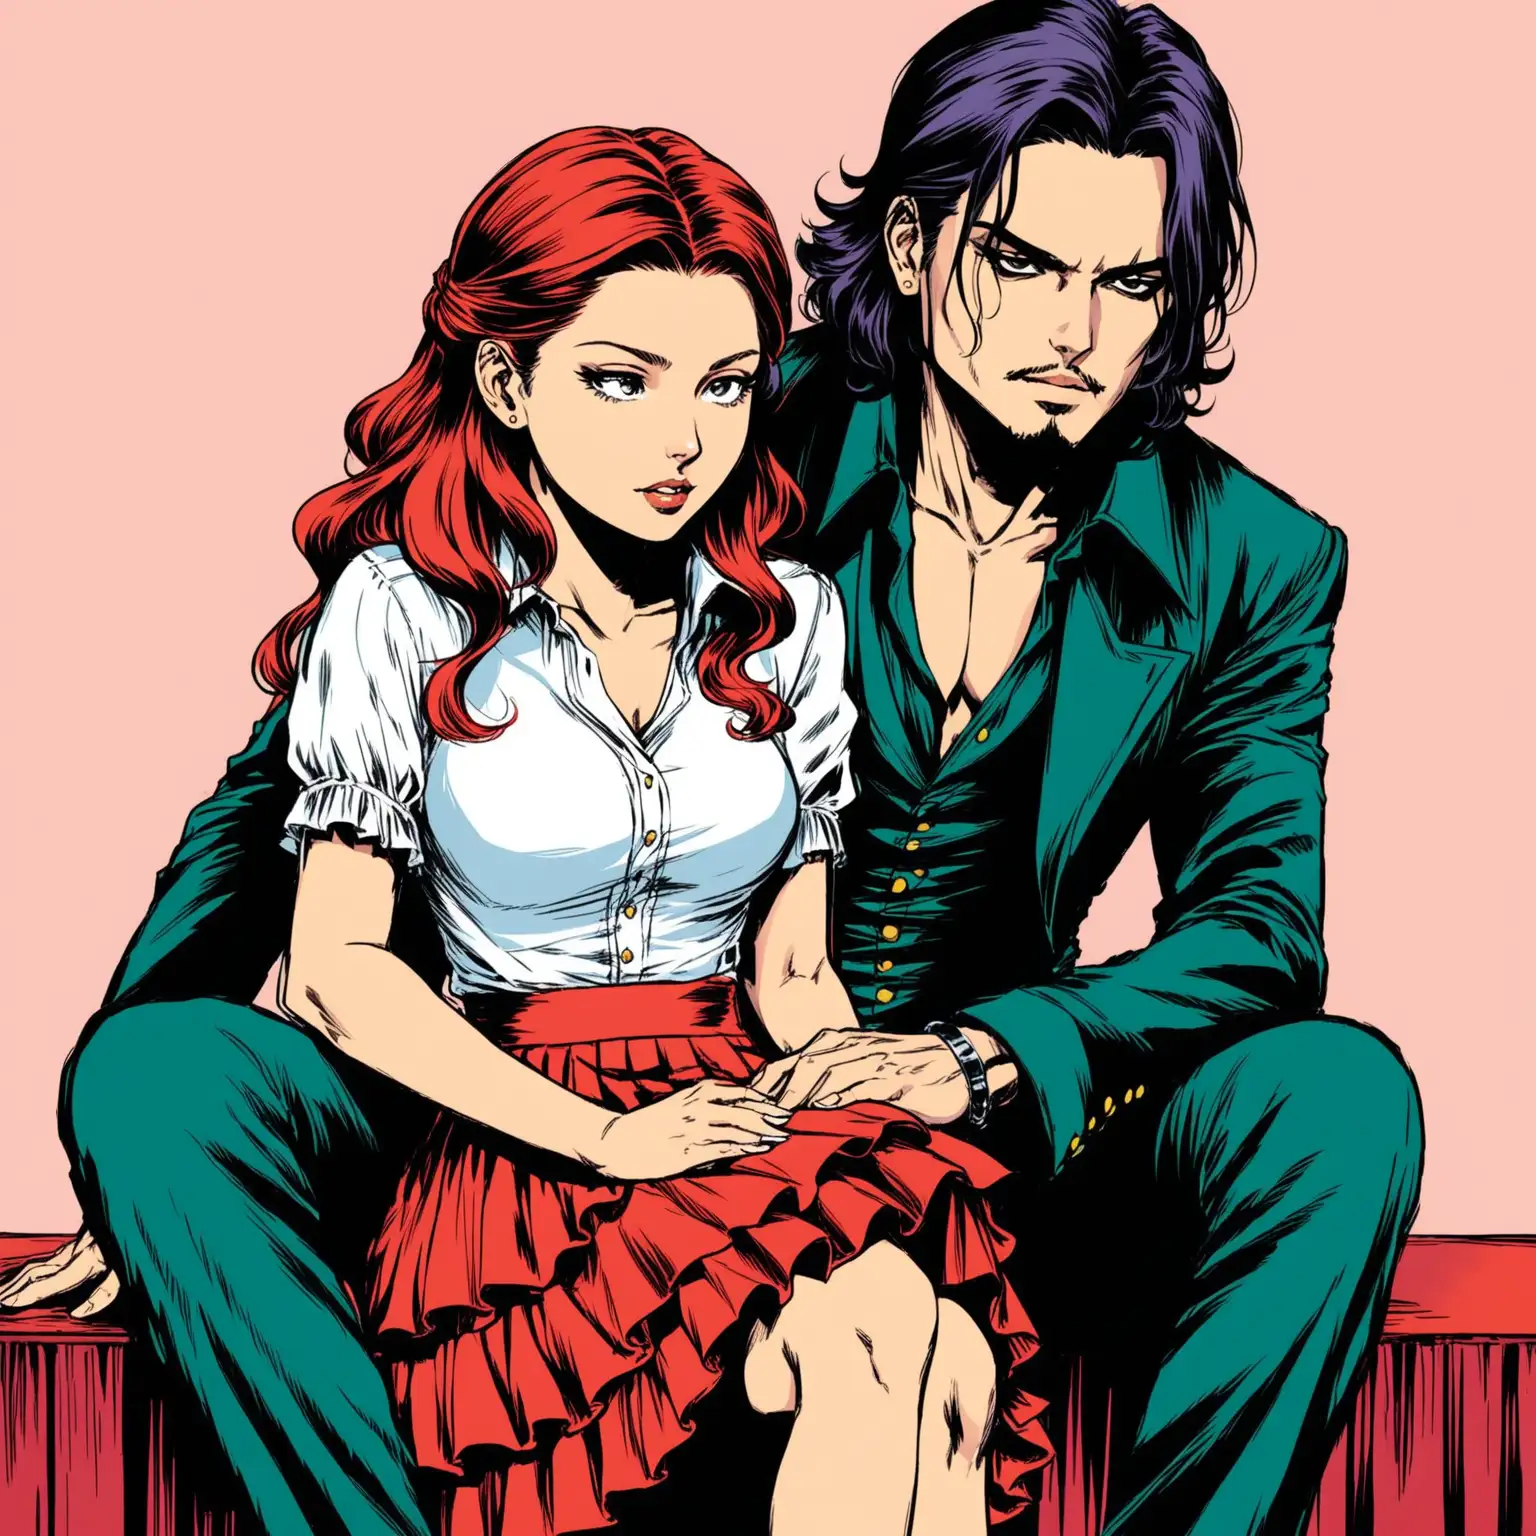 Comic Style Illustration Womans Stroke by Olivia Casta with Johnny Depp Lookalike in Colombo Attire